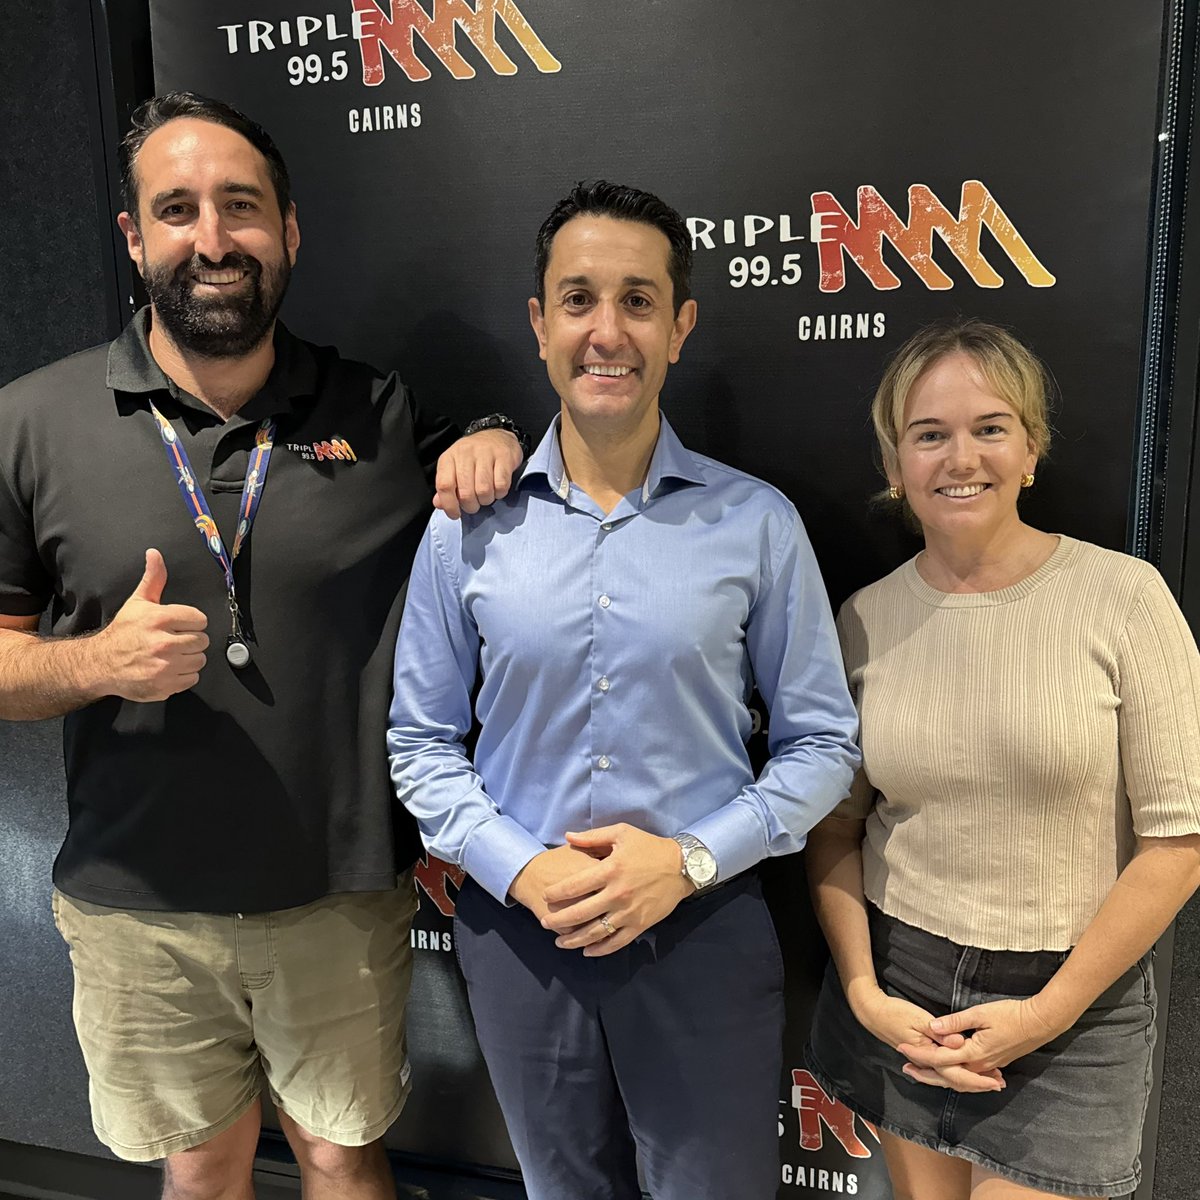 Chatting all things Far North Queensland and the future of the region with Tammy & JB on Triple M Cairns this morning!🎙️